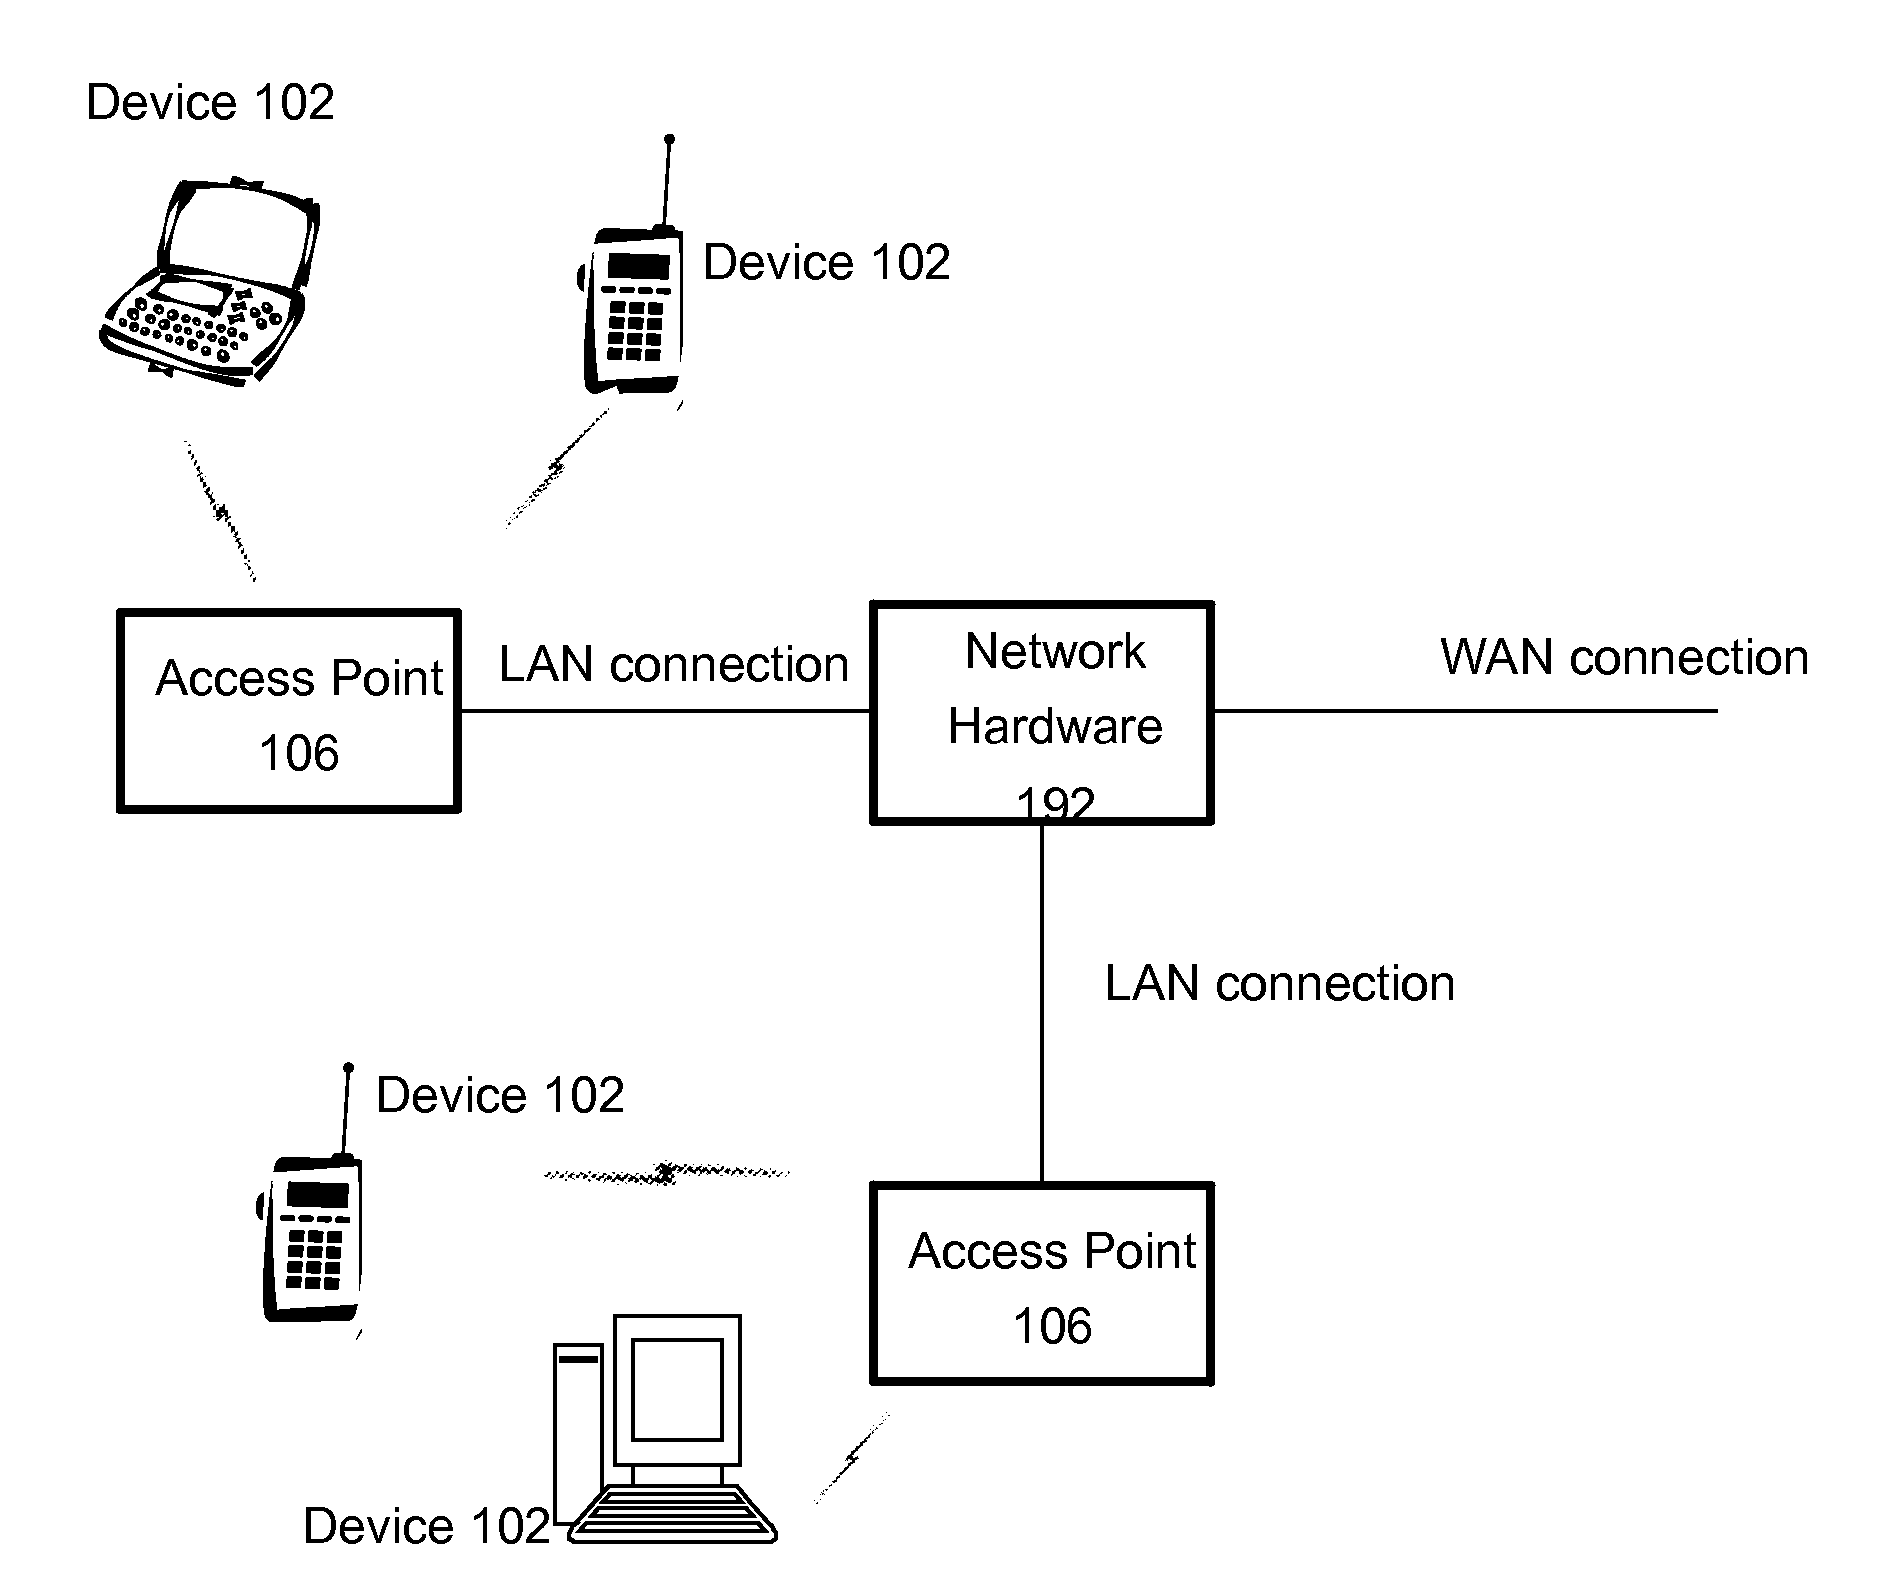 Carrier aggregation over LTE and WIFI